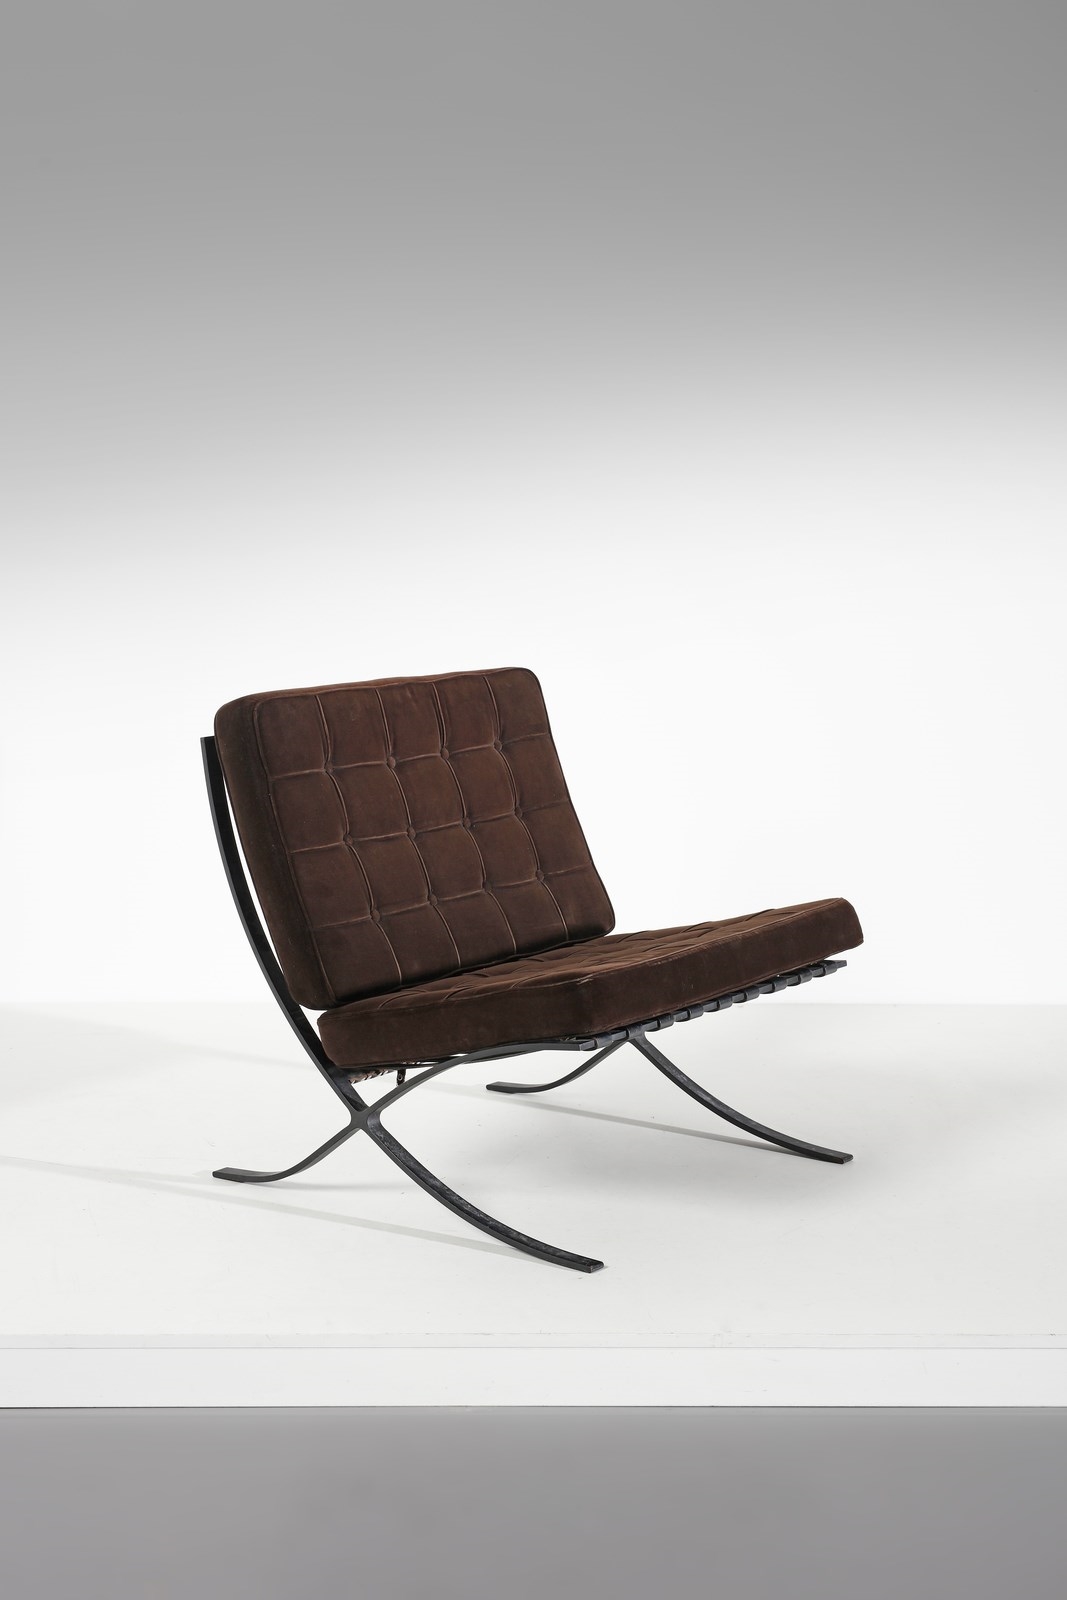 Barcelona armchair for Knoll by Ludwig Mies van der Rohe, 1964